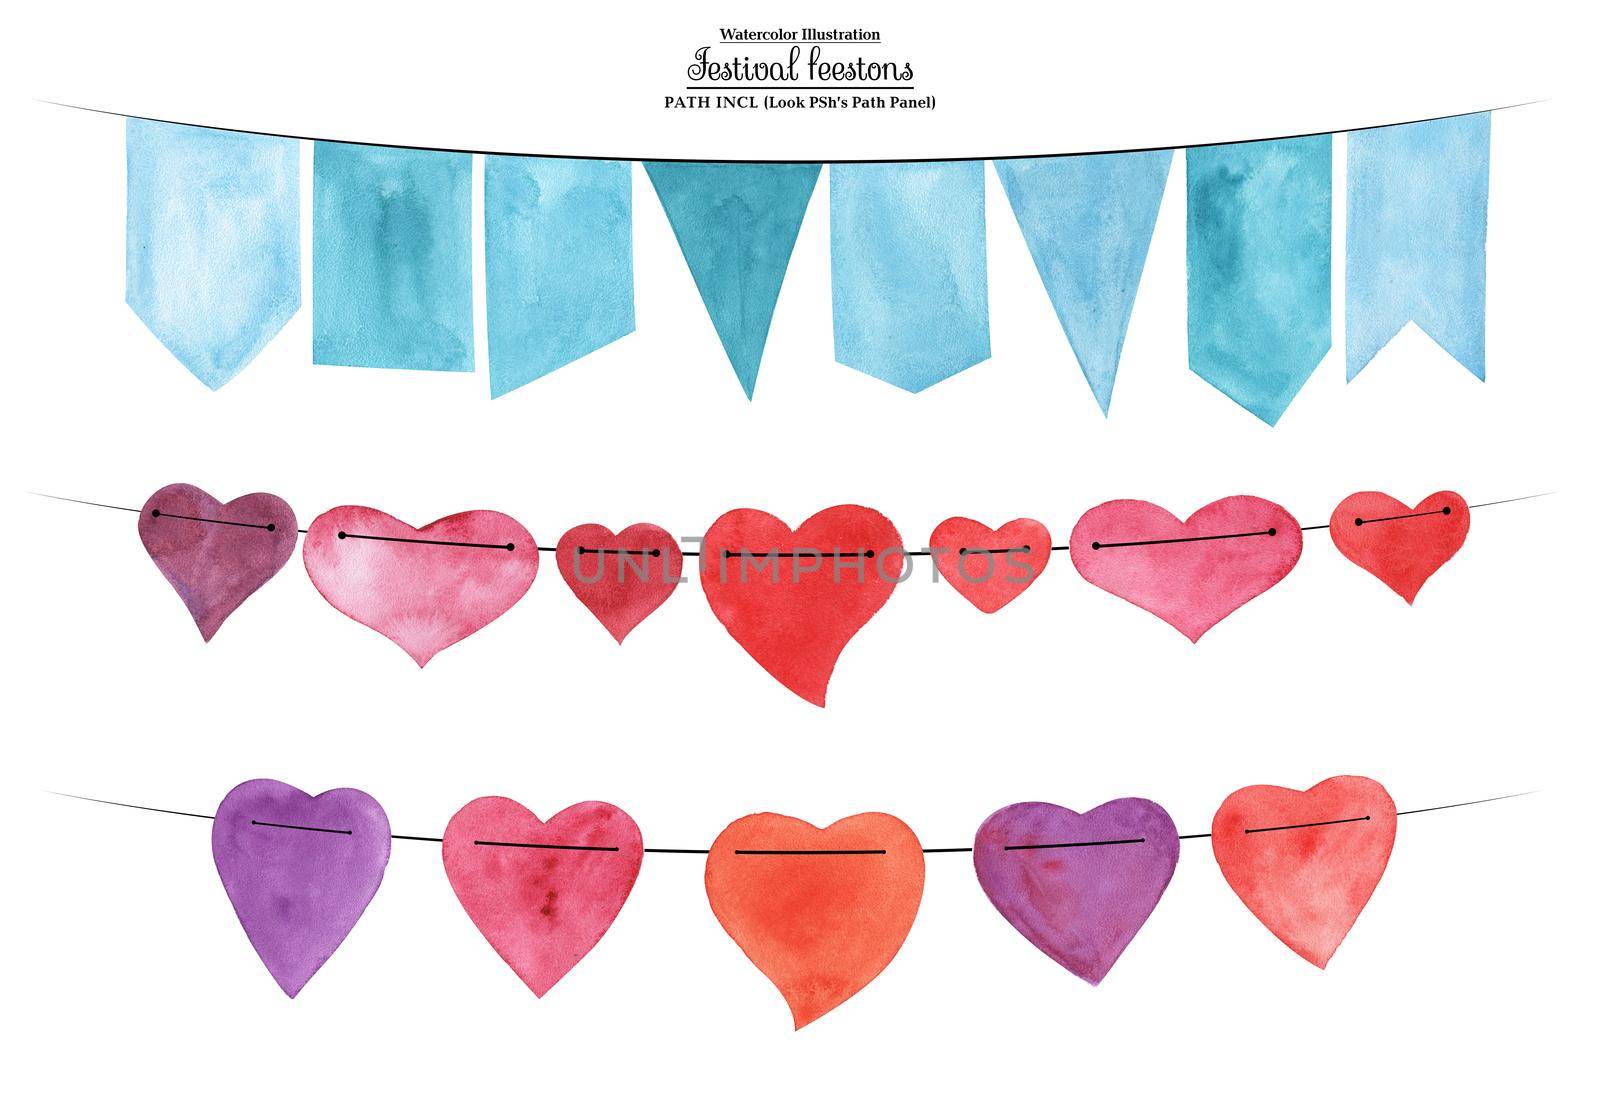 Watercolor set. Festival and party festoons. Flags and hearts